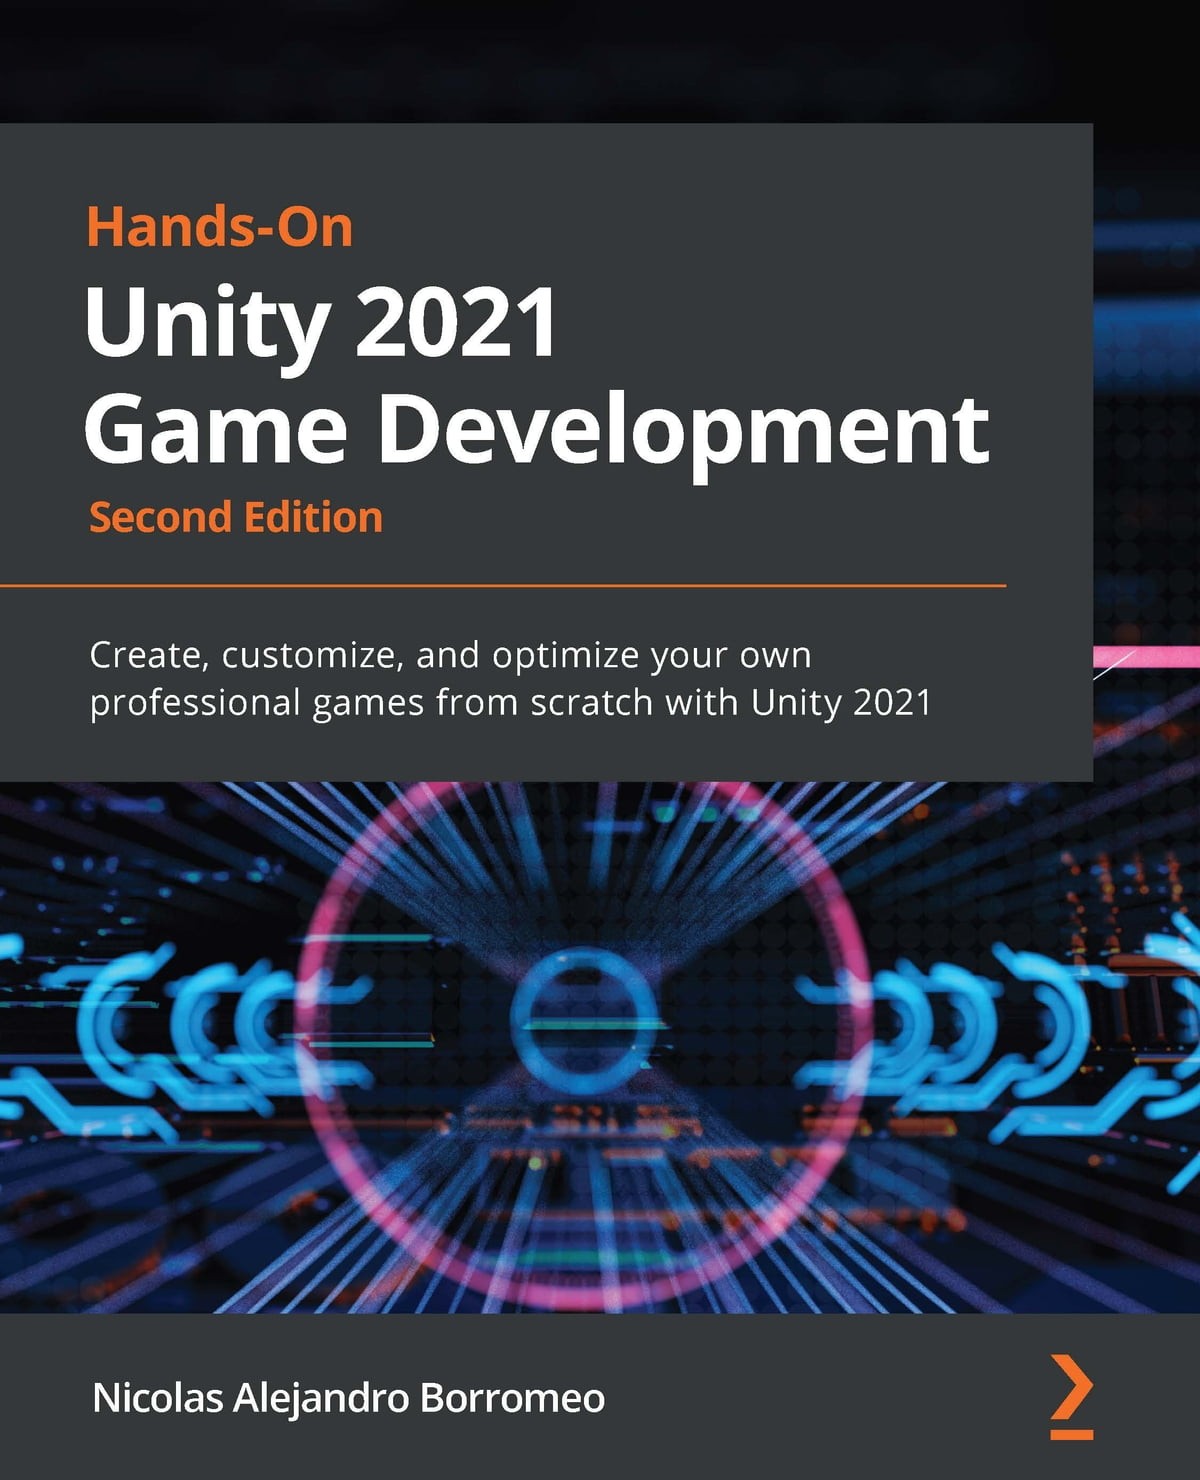 Hands-On Unity 2020 Game Development: Build, Customize, and Optimize Professional Games Using Unity 2020 and C#